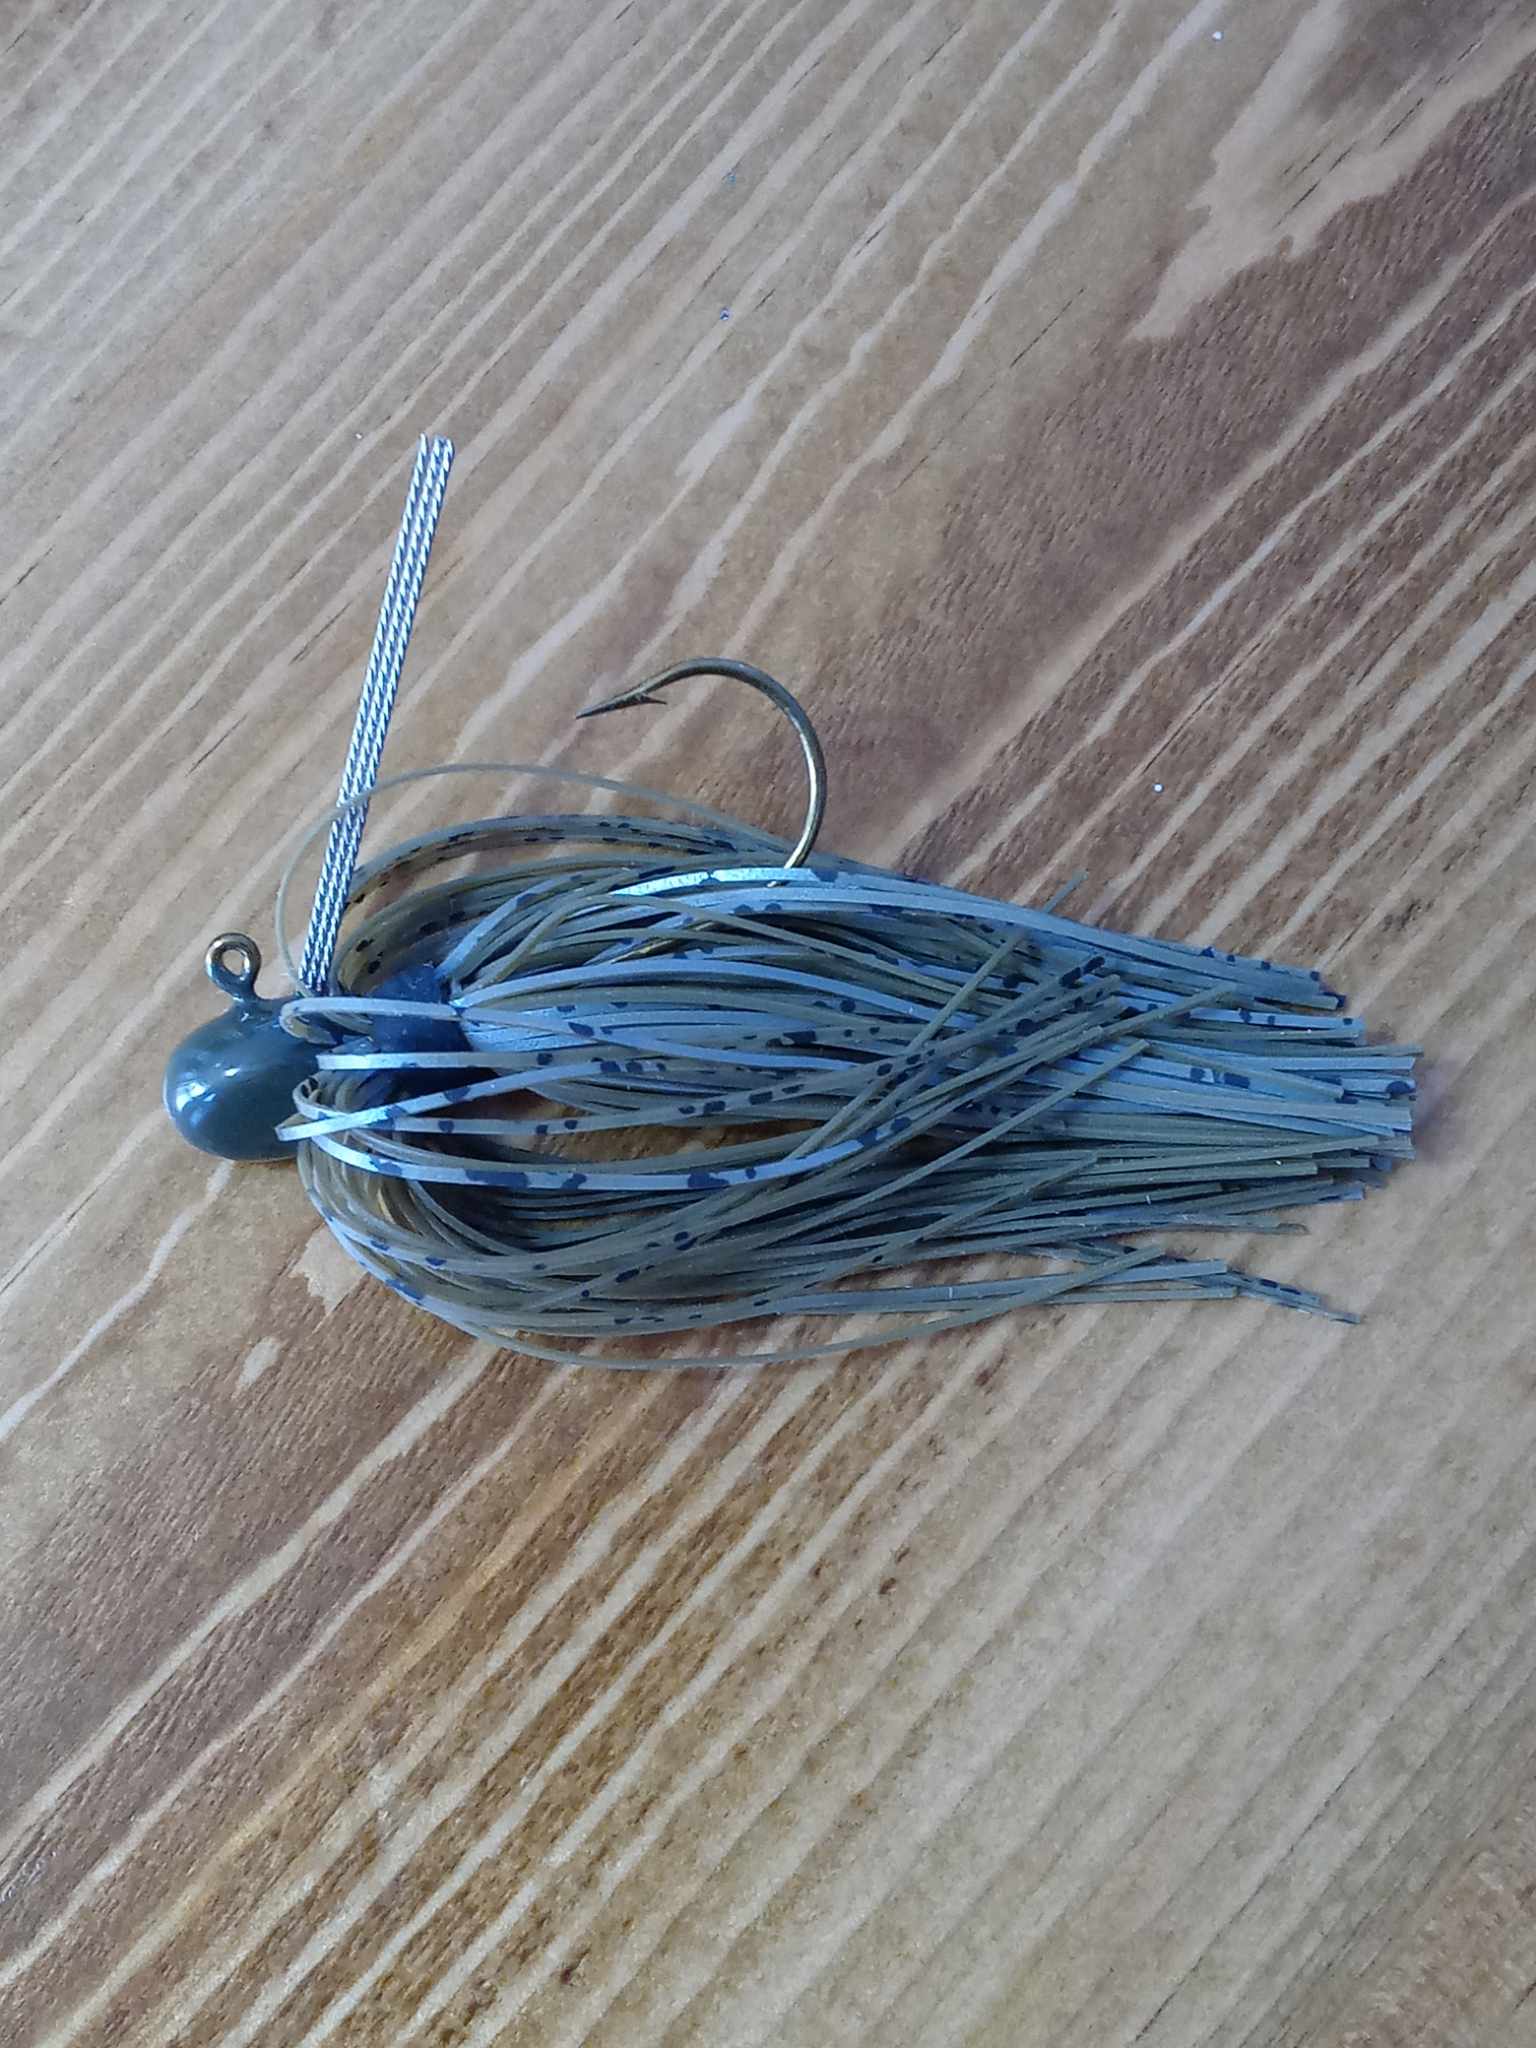 12 DHT Small Jaw Finesse Jig (Silicon Skirt) – Dale Hollow Tackle